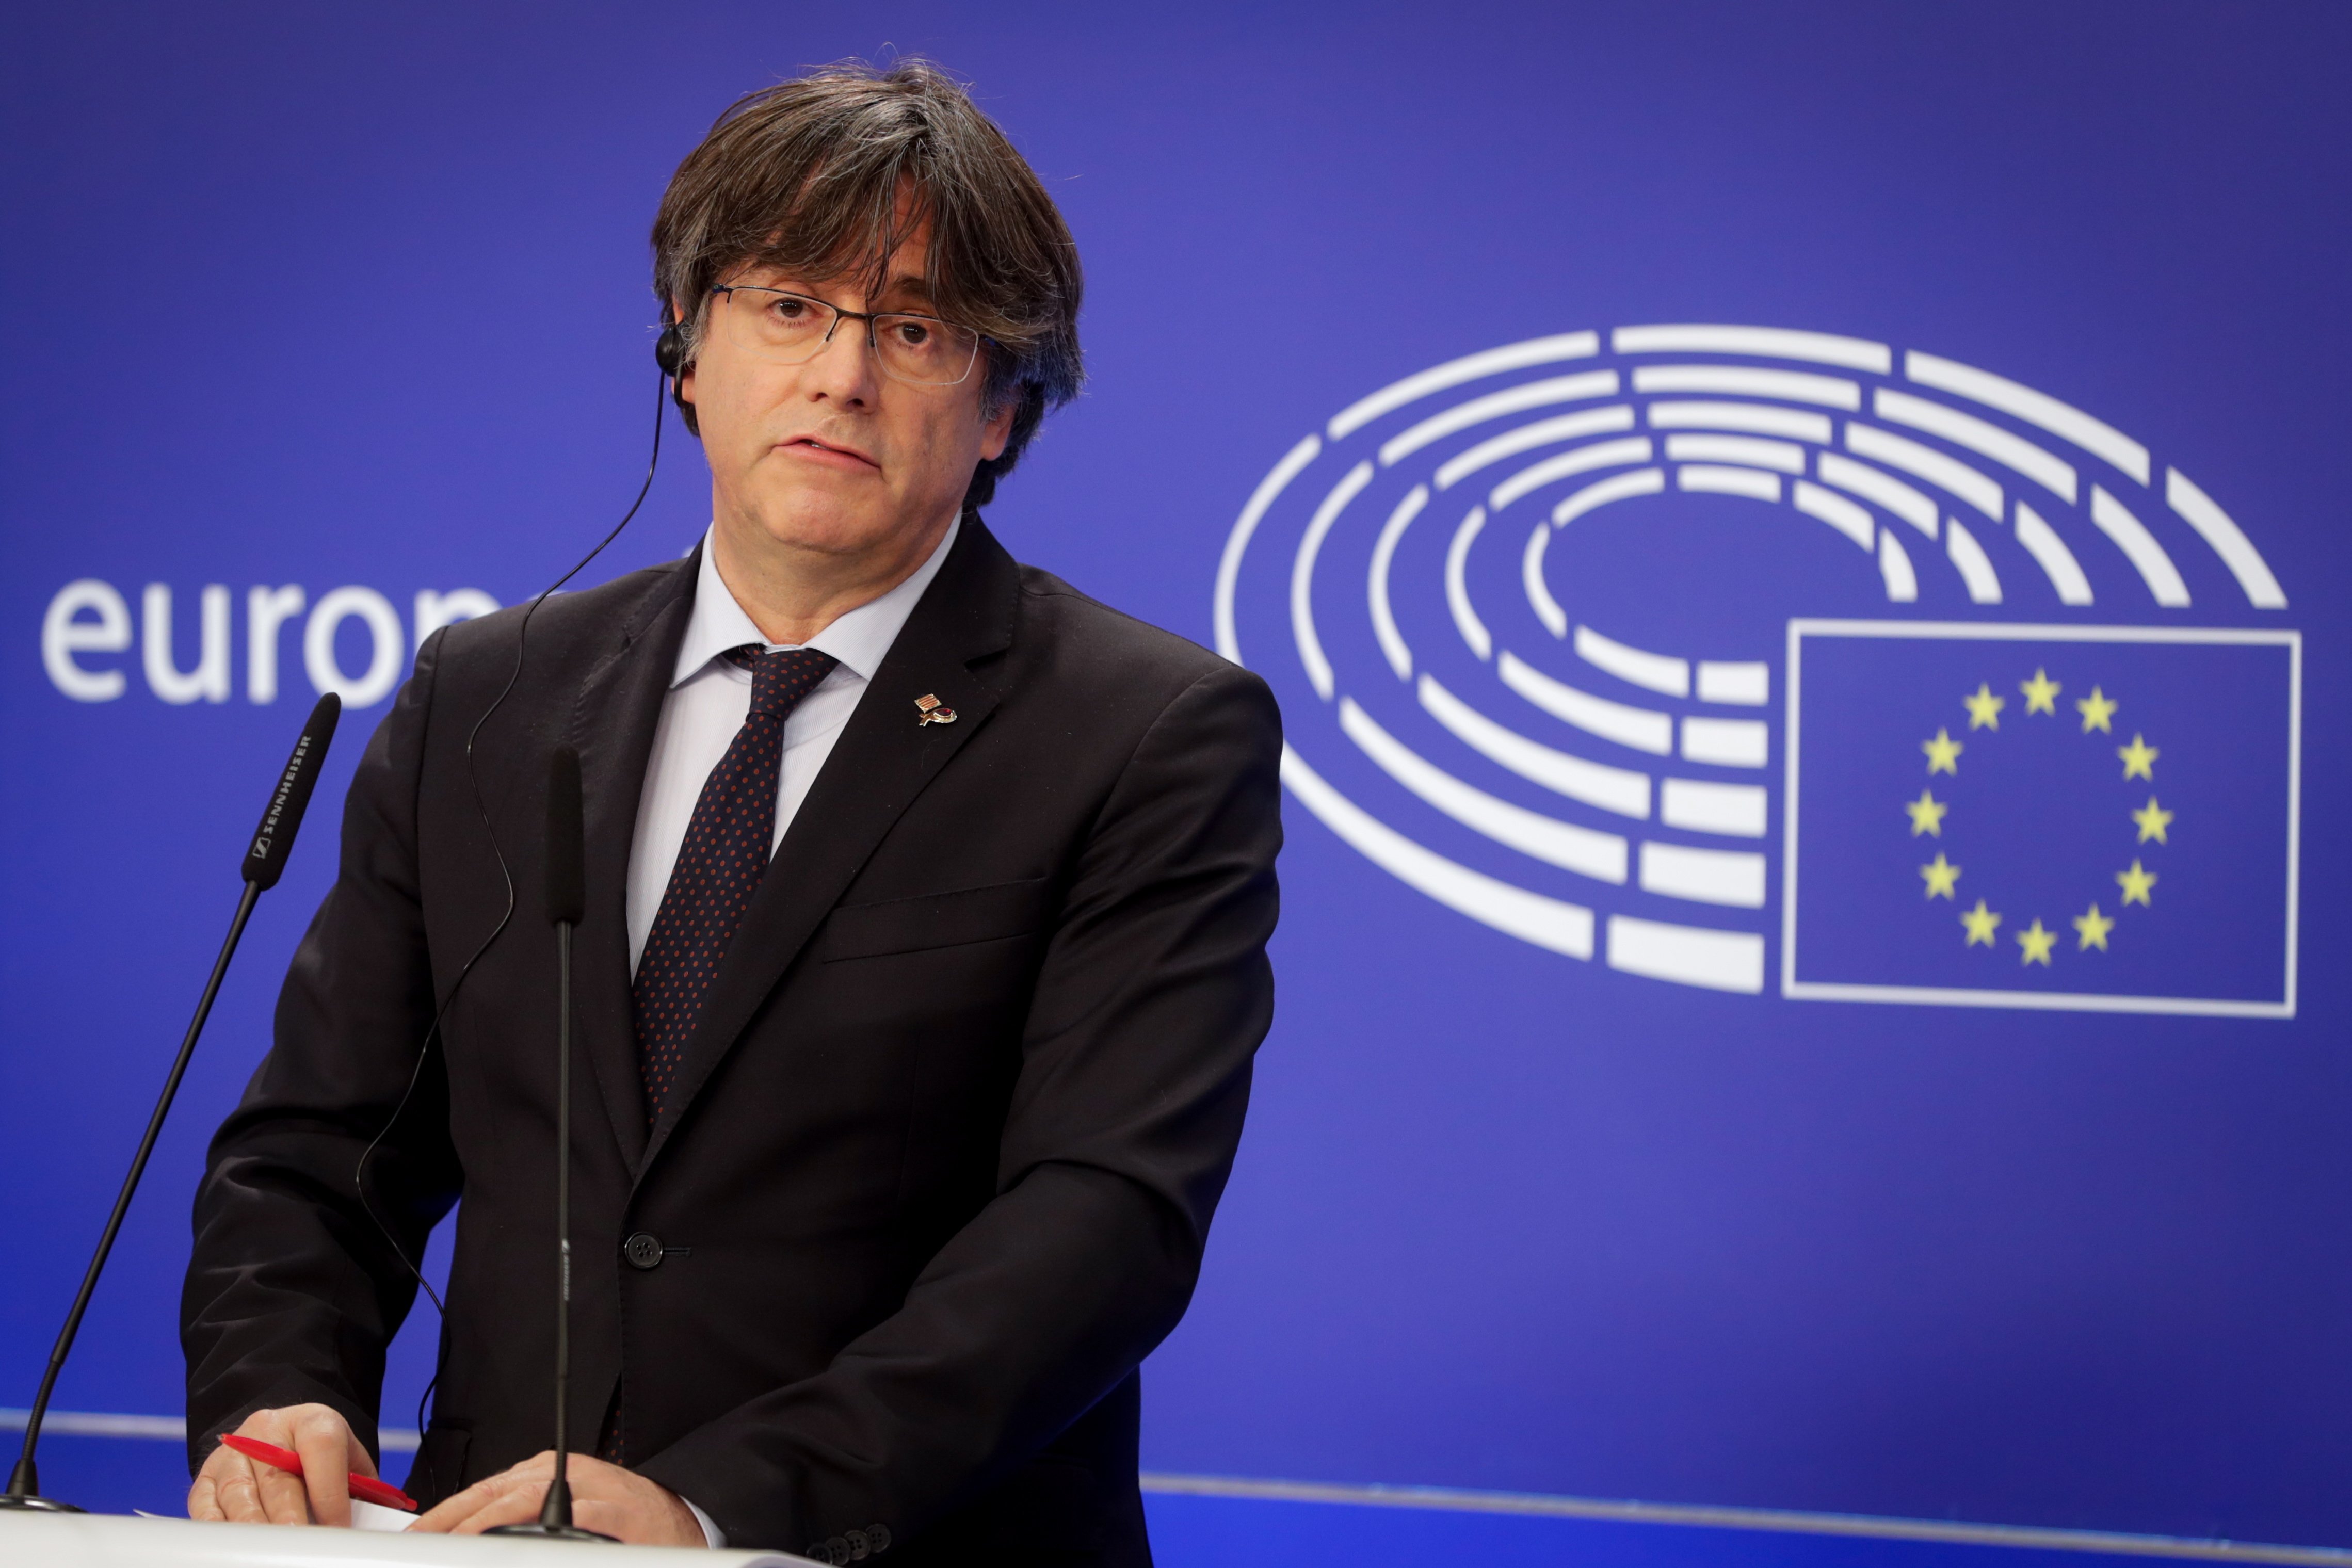 Poland and Romania align with Spain against Puigdemont over EU justice questions